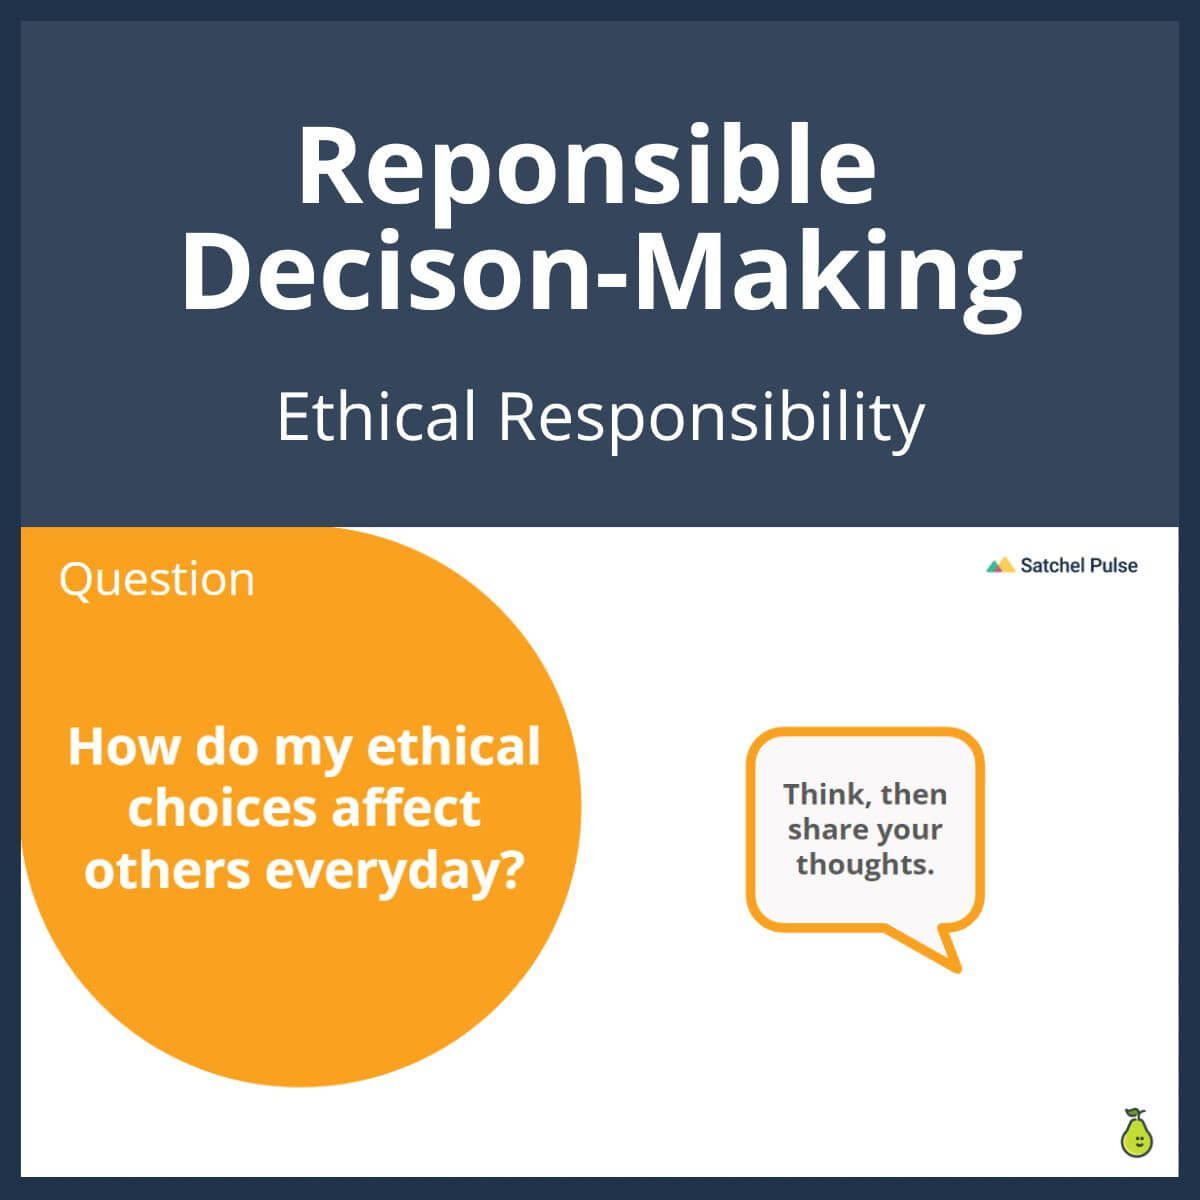 SEL Lesson focusing on Ethical Responsibility to use in your classroom as one of your SEL activities for Responsible Decision-Making